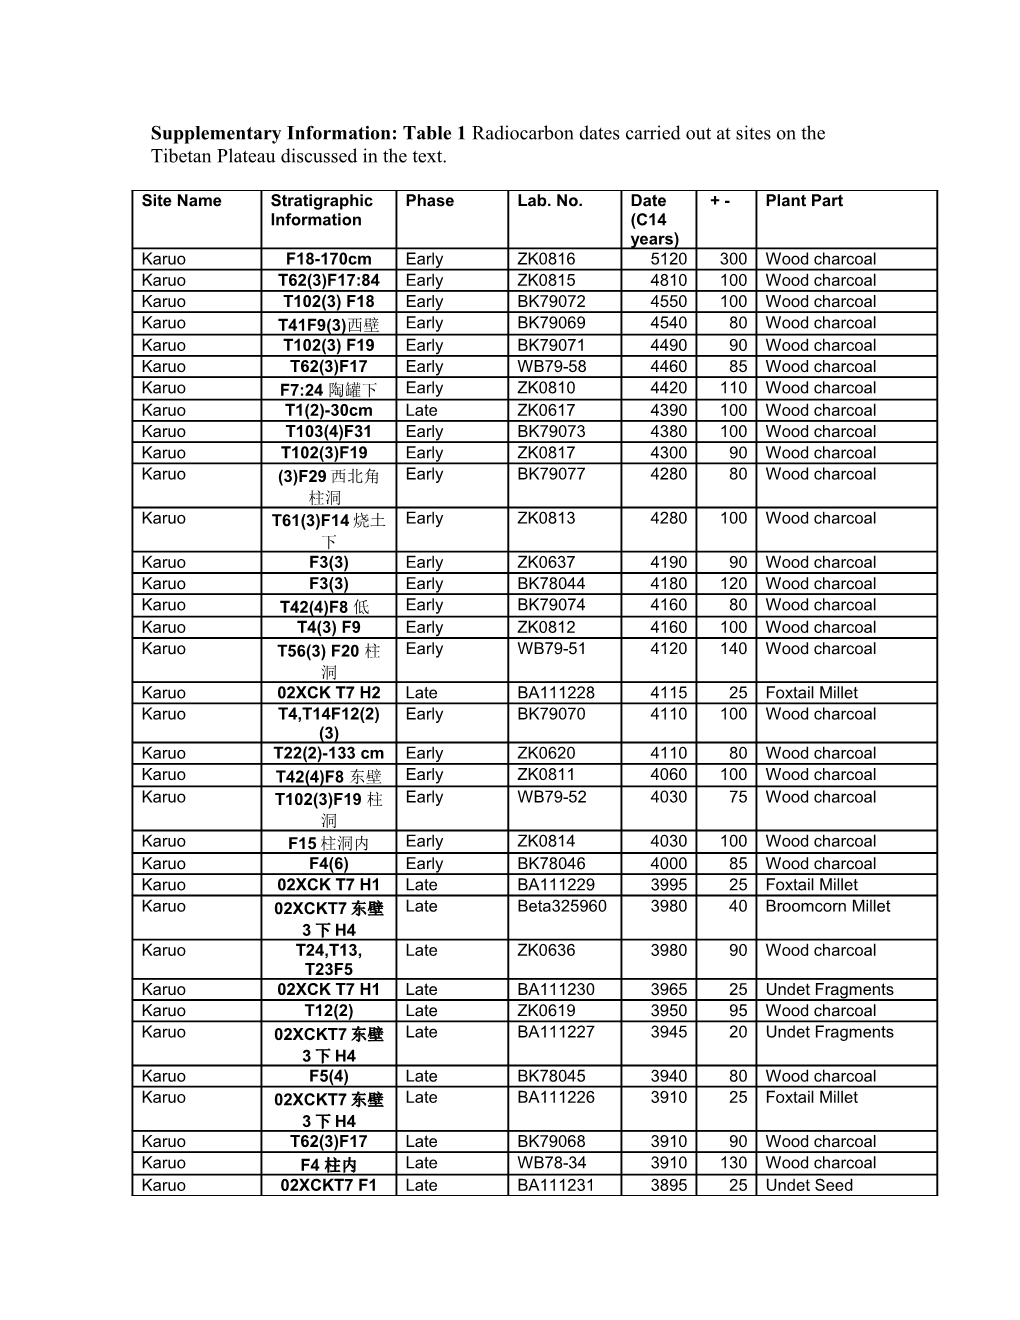 Supplementary Information: Table 1 Radiocarbon Dates Carried out at Sites on the Tibetan